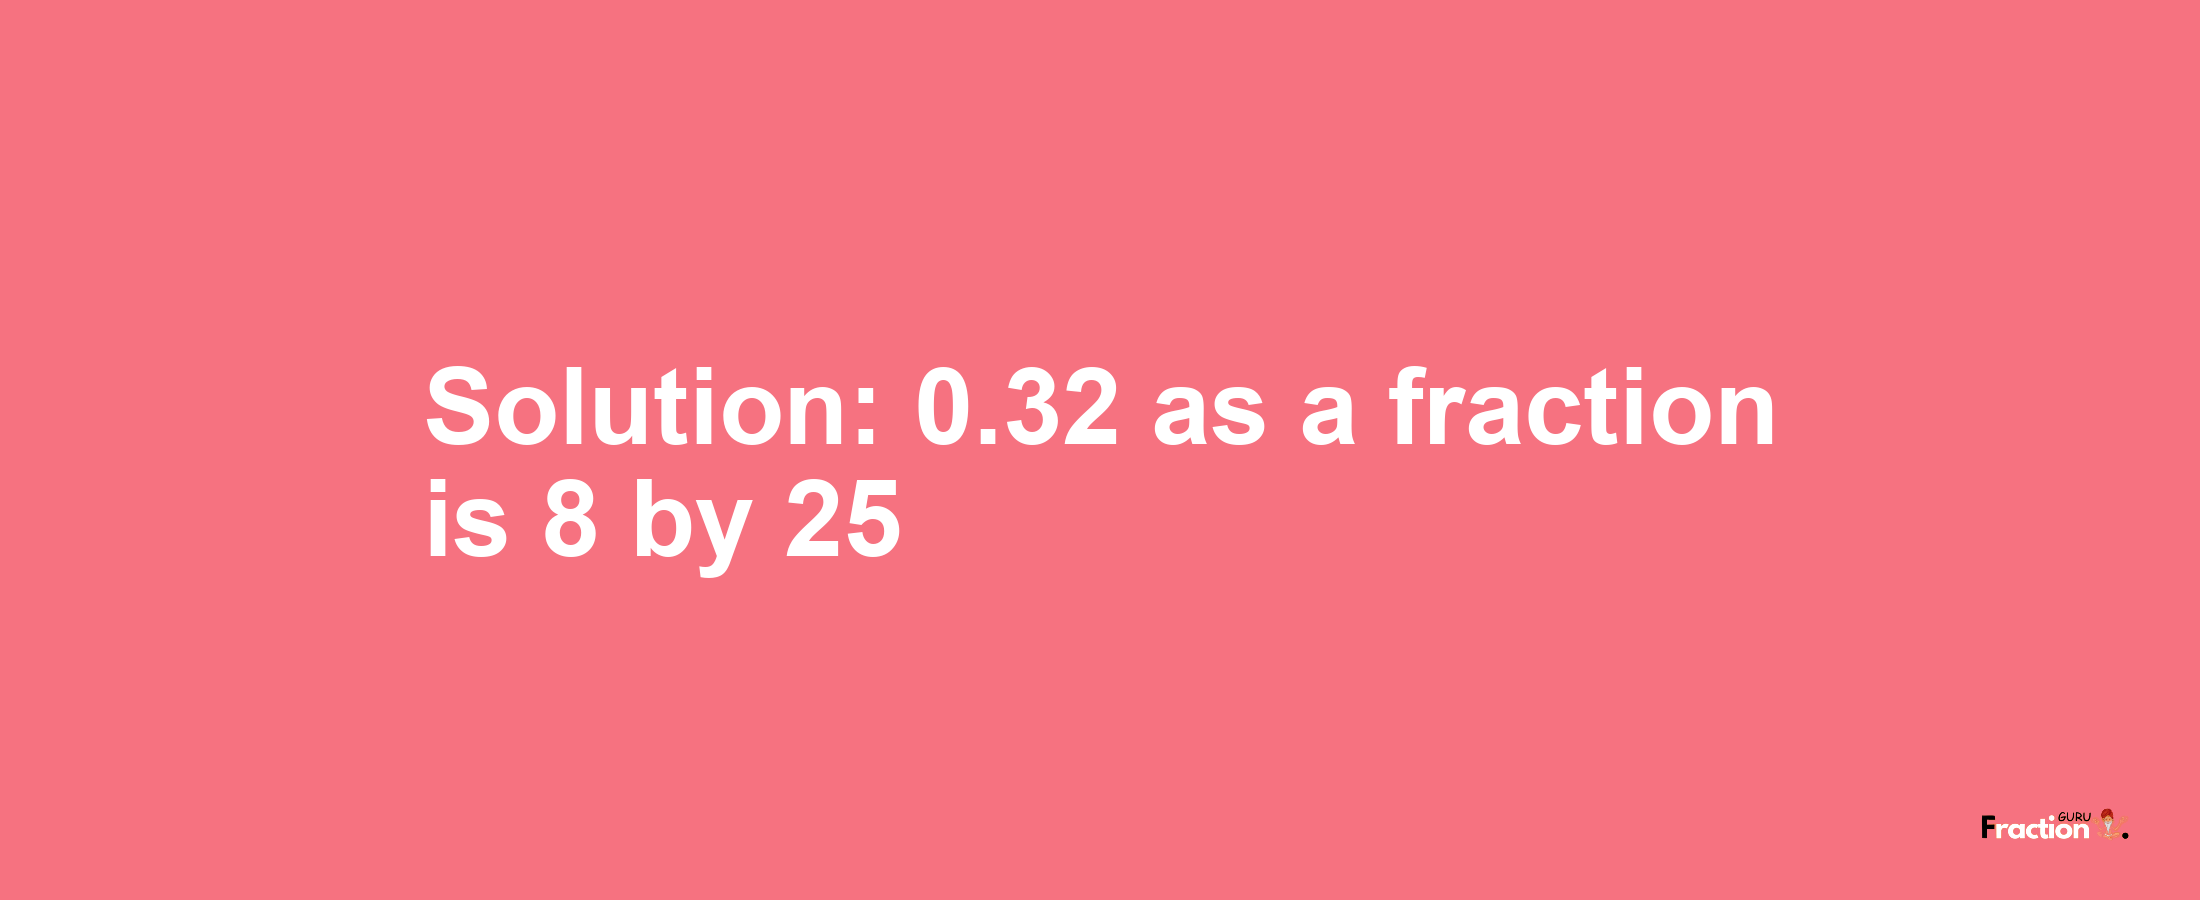 Solution:0.32 as a fraction is 8/25